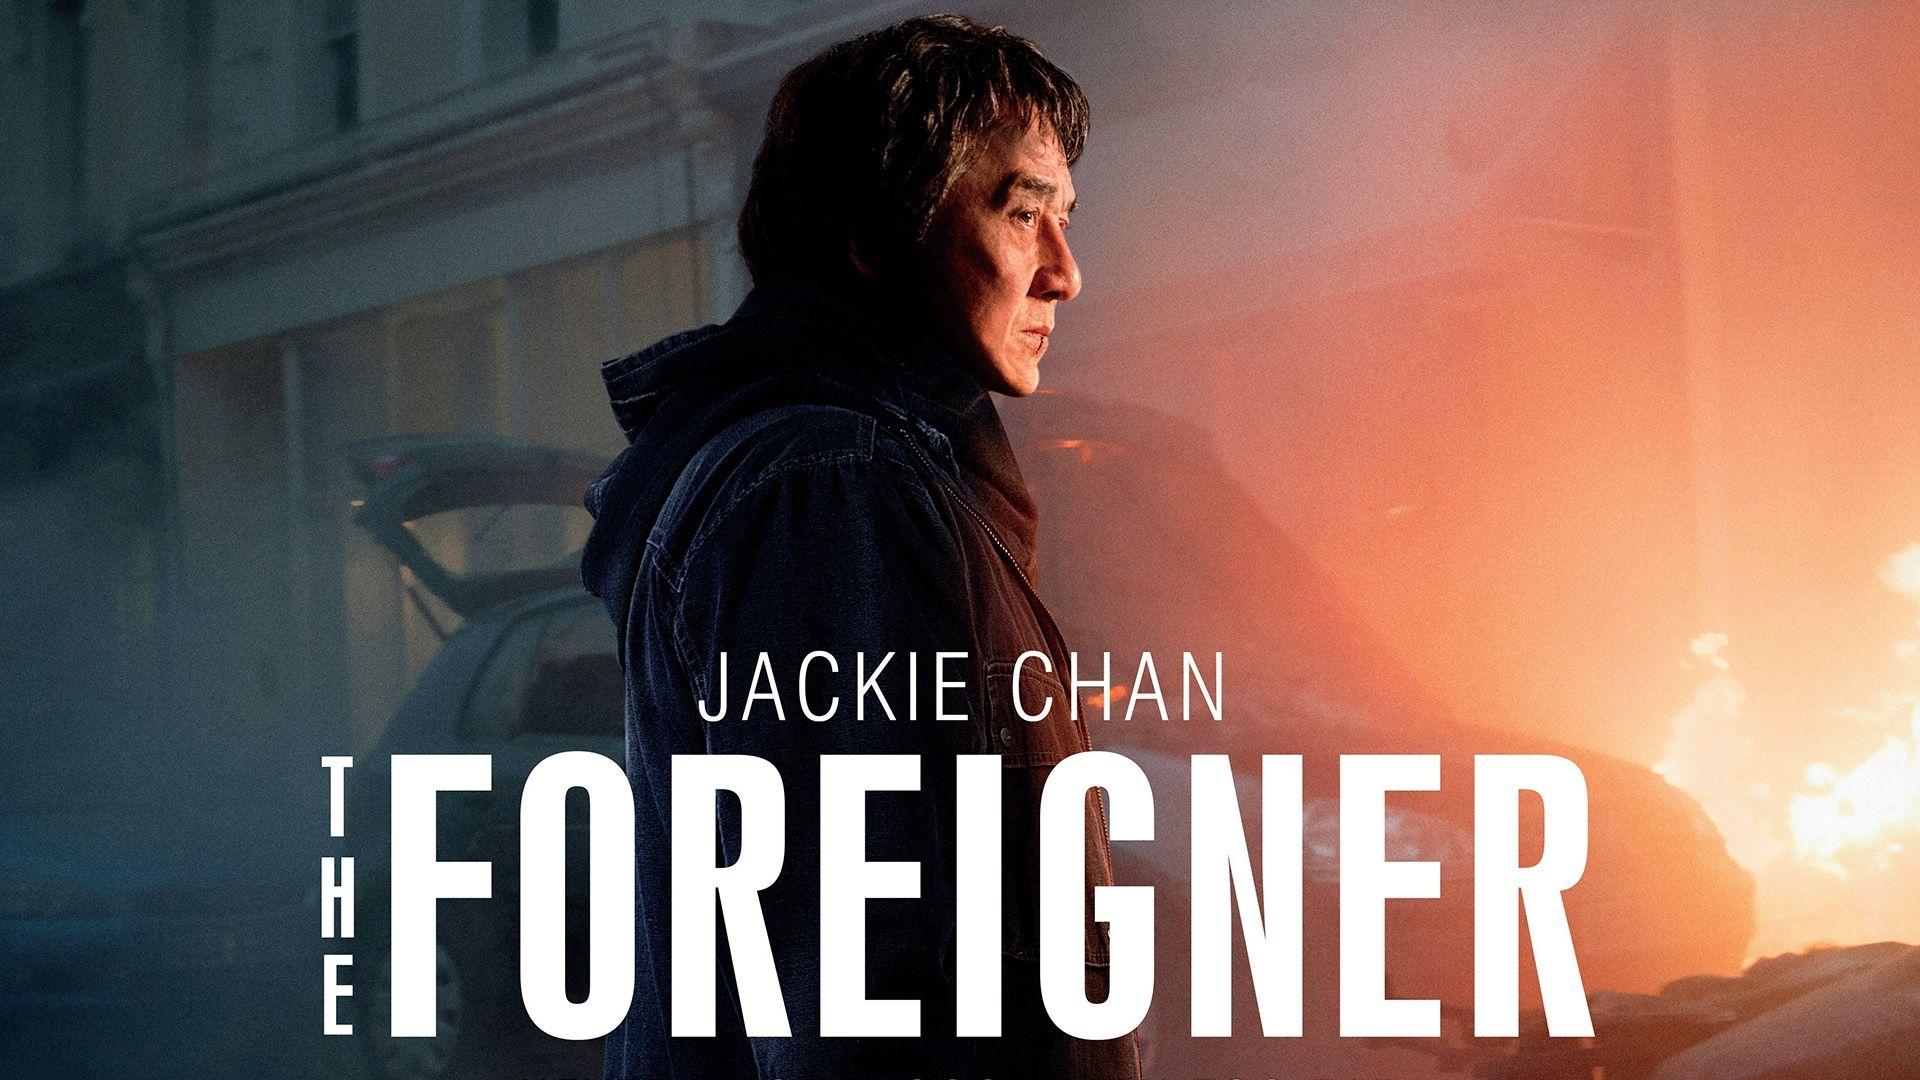 The Foreigner 2017 Jackie Chan Movie. Wallpaper